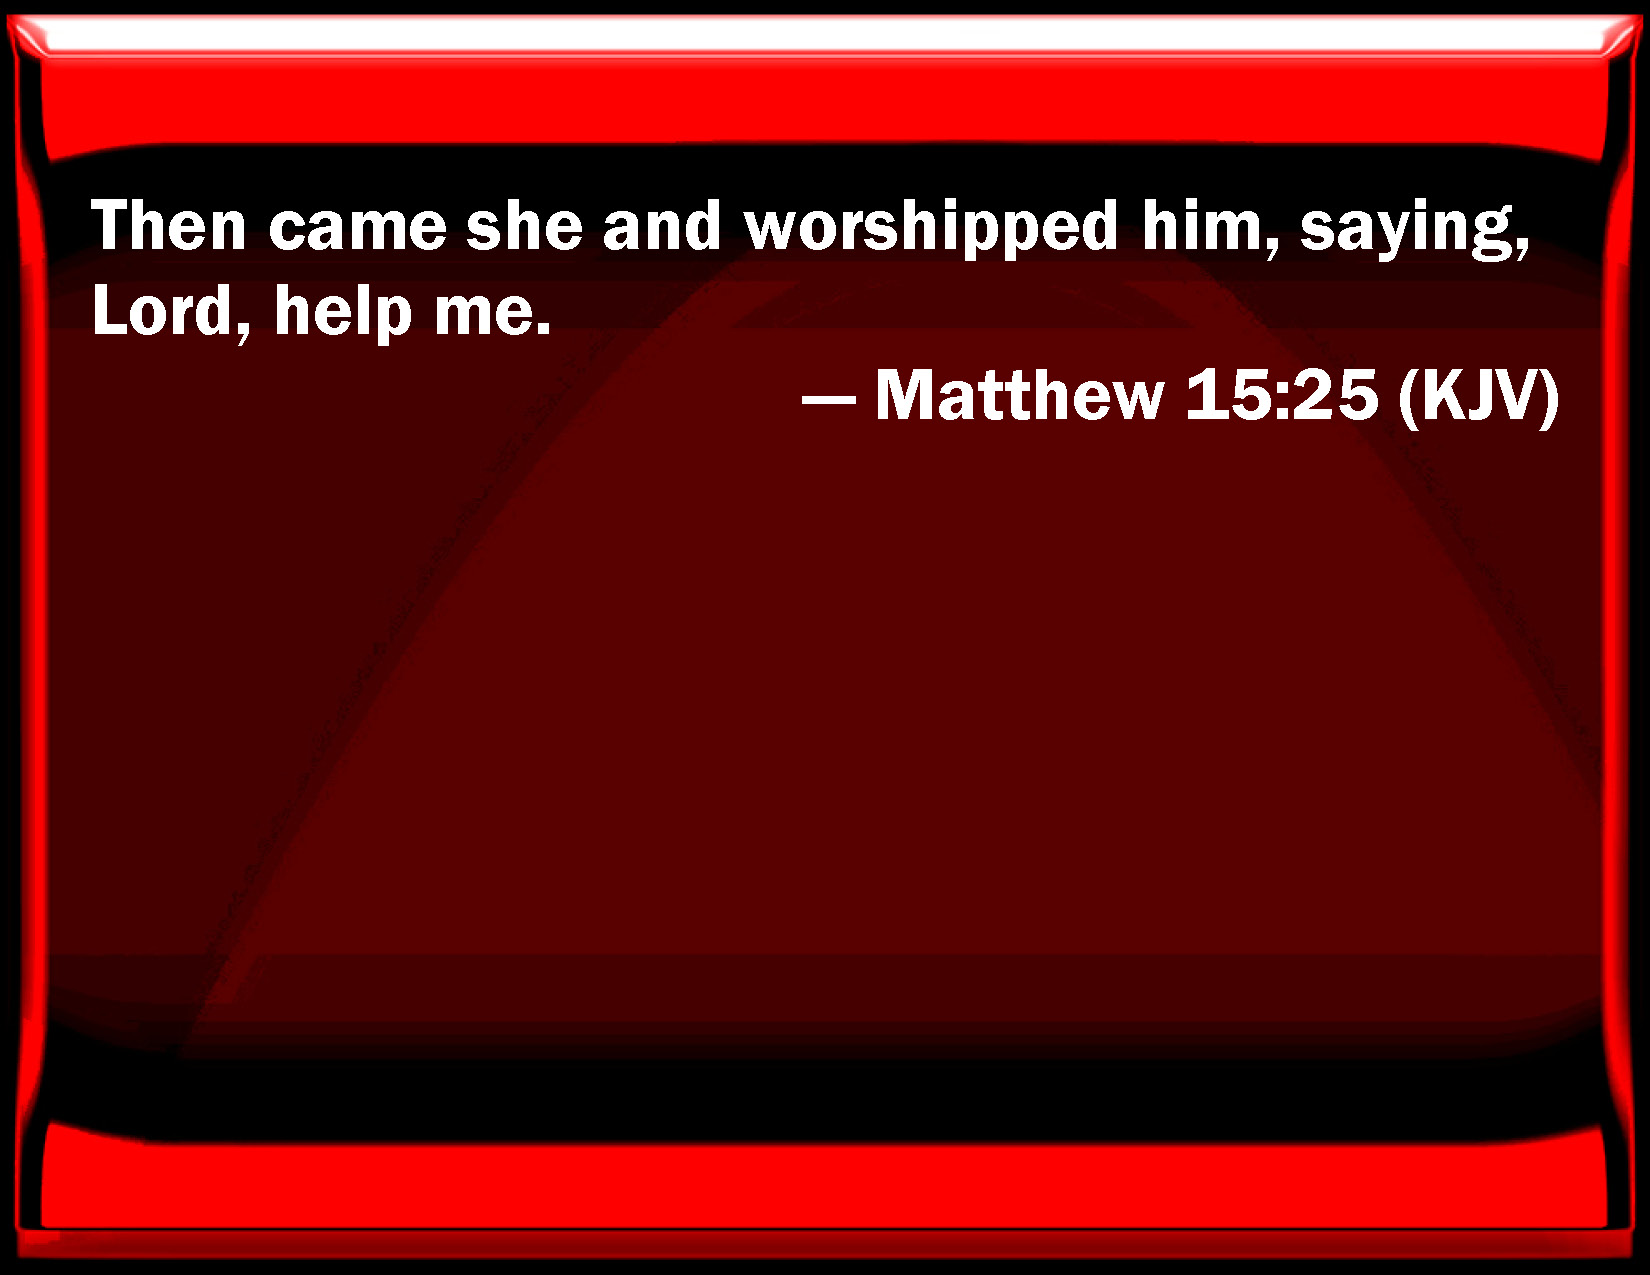 Matthew 15:25 Then came she and worshipped him, saying, Lord, help me.